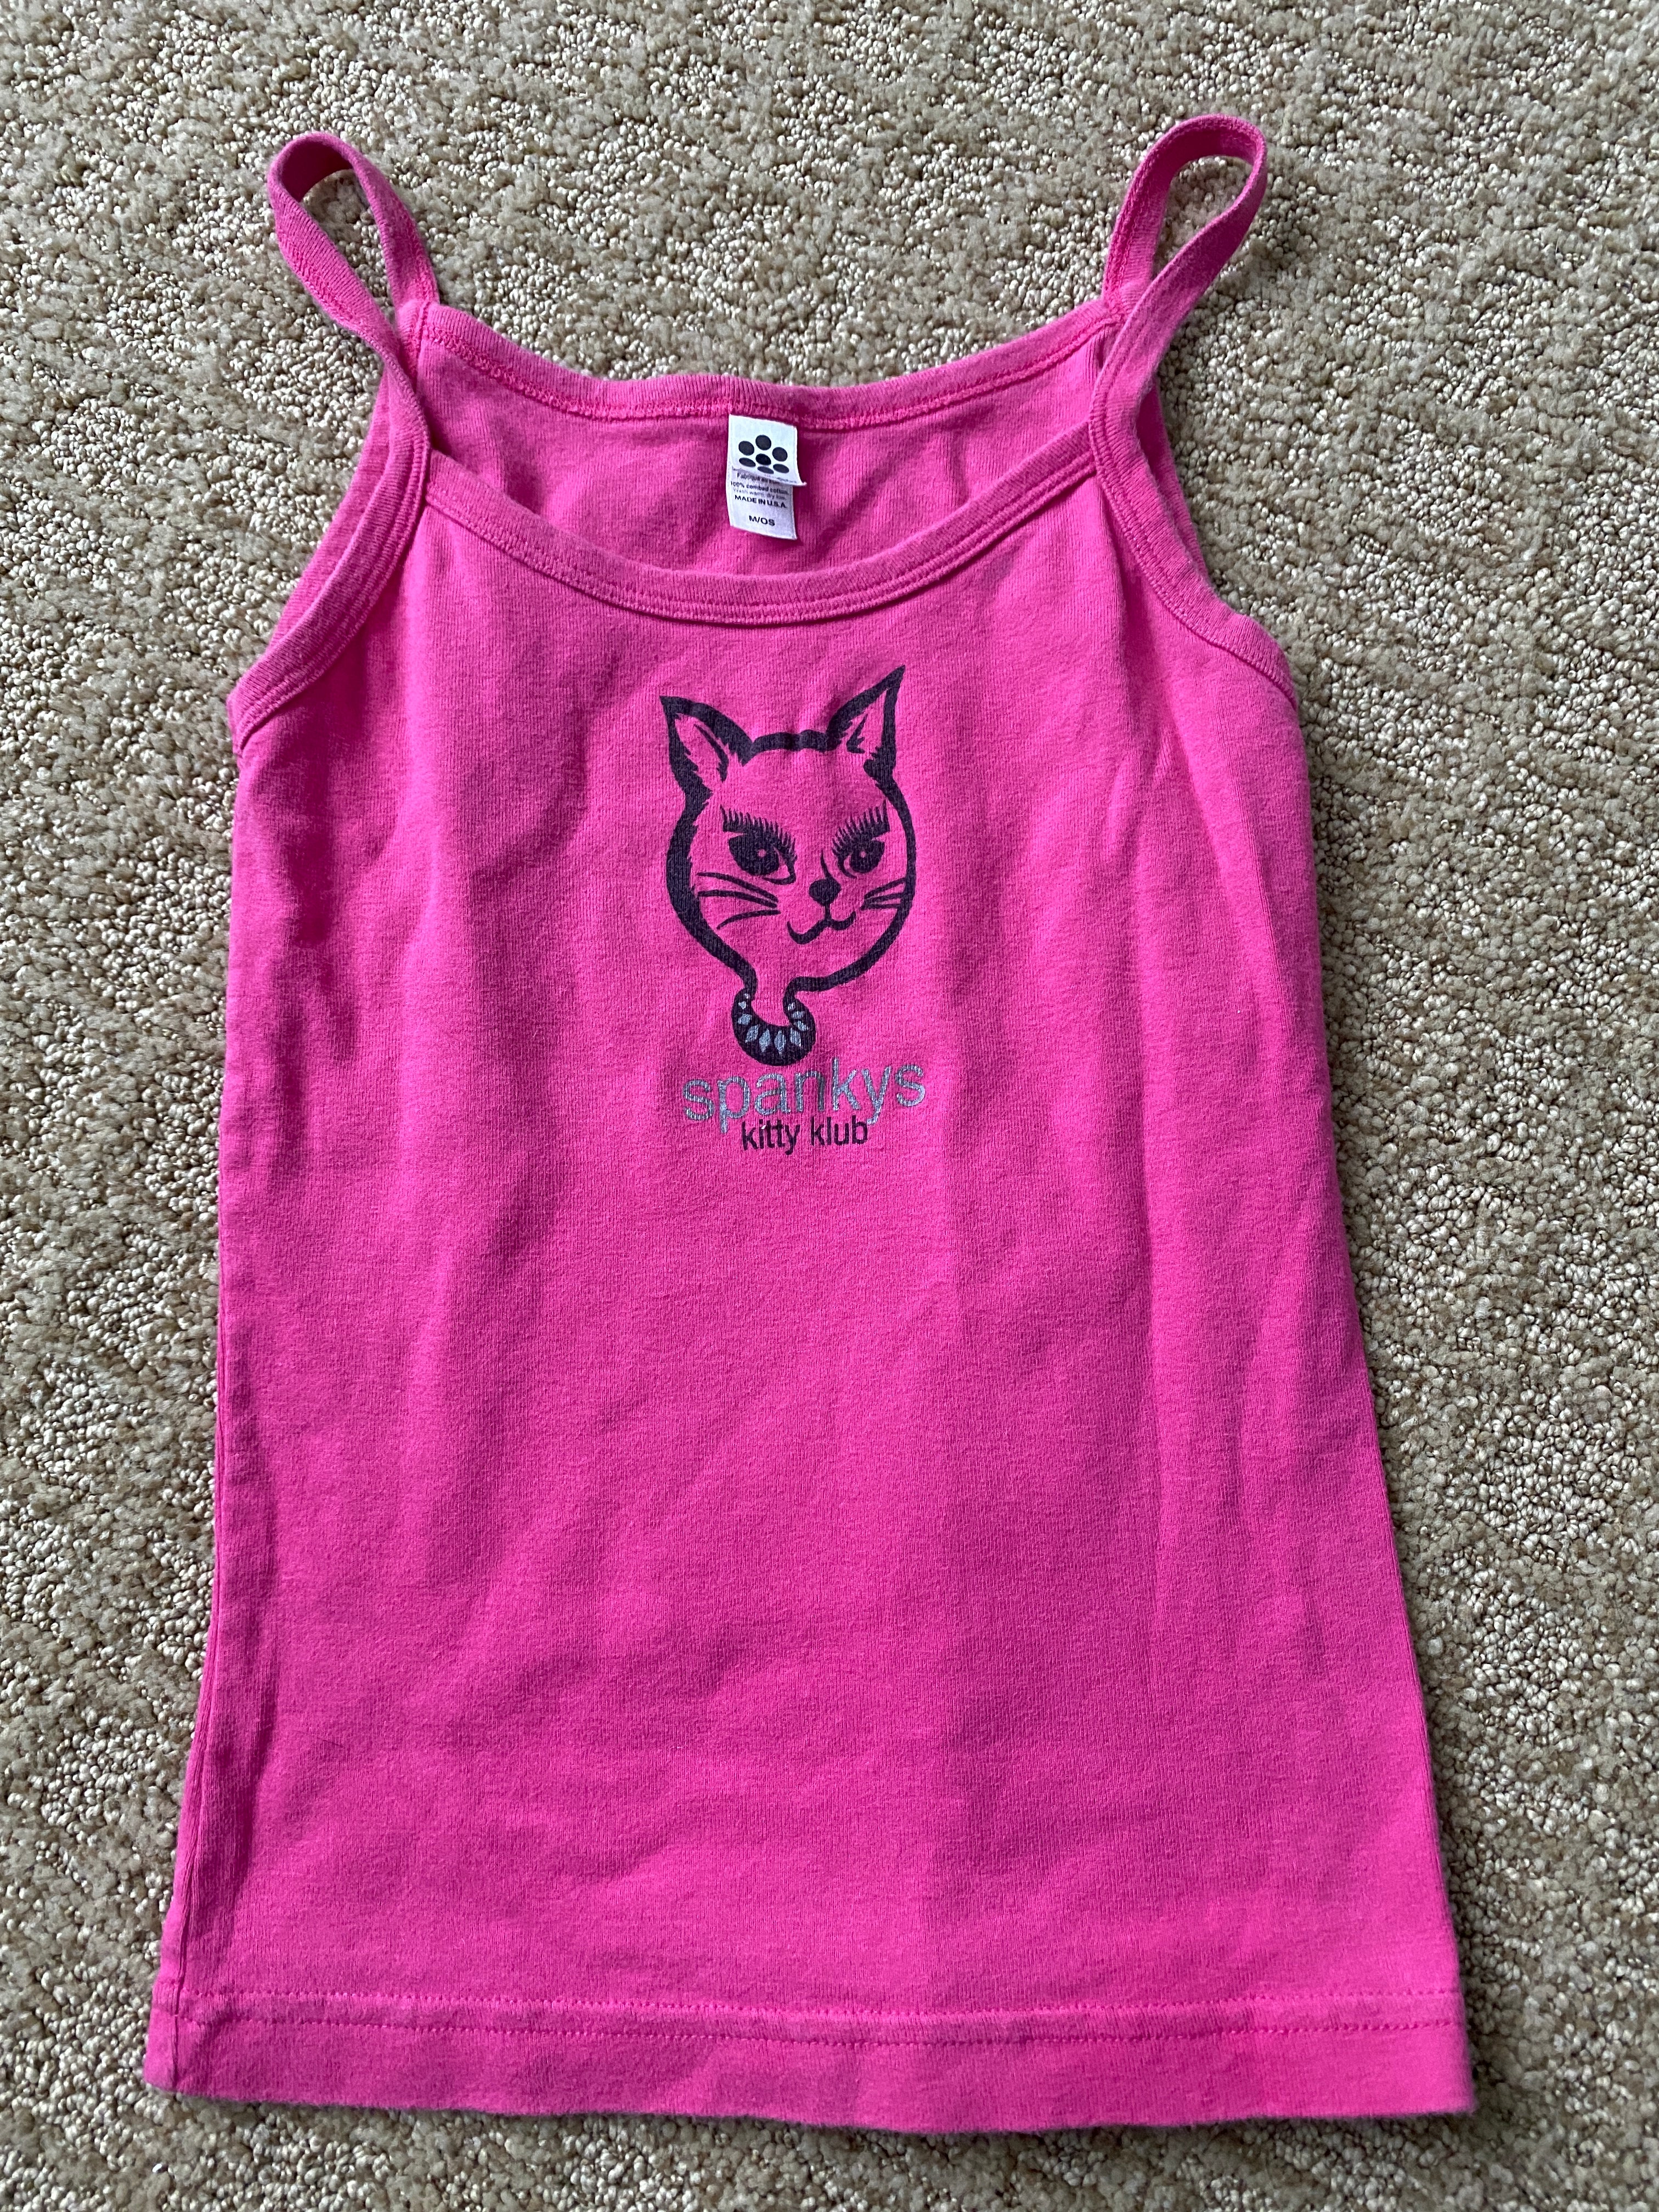 Spanky's Pink Tank Top - Autographed